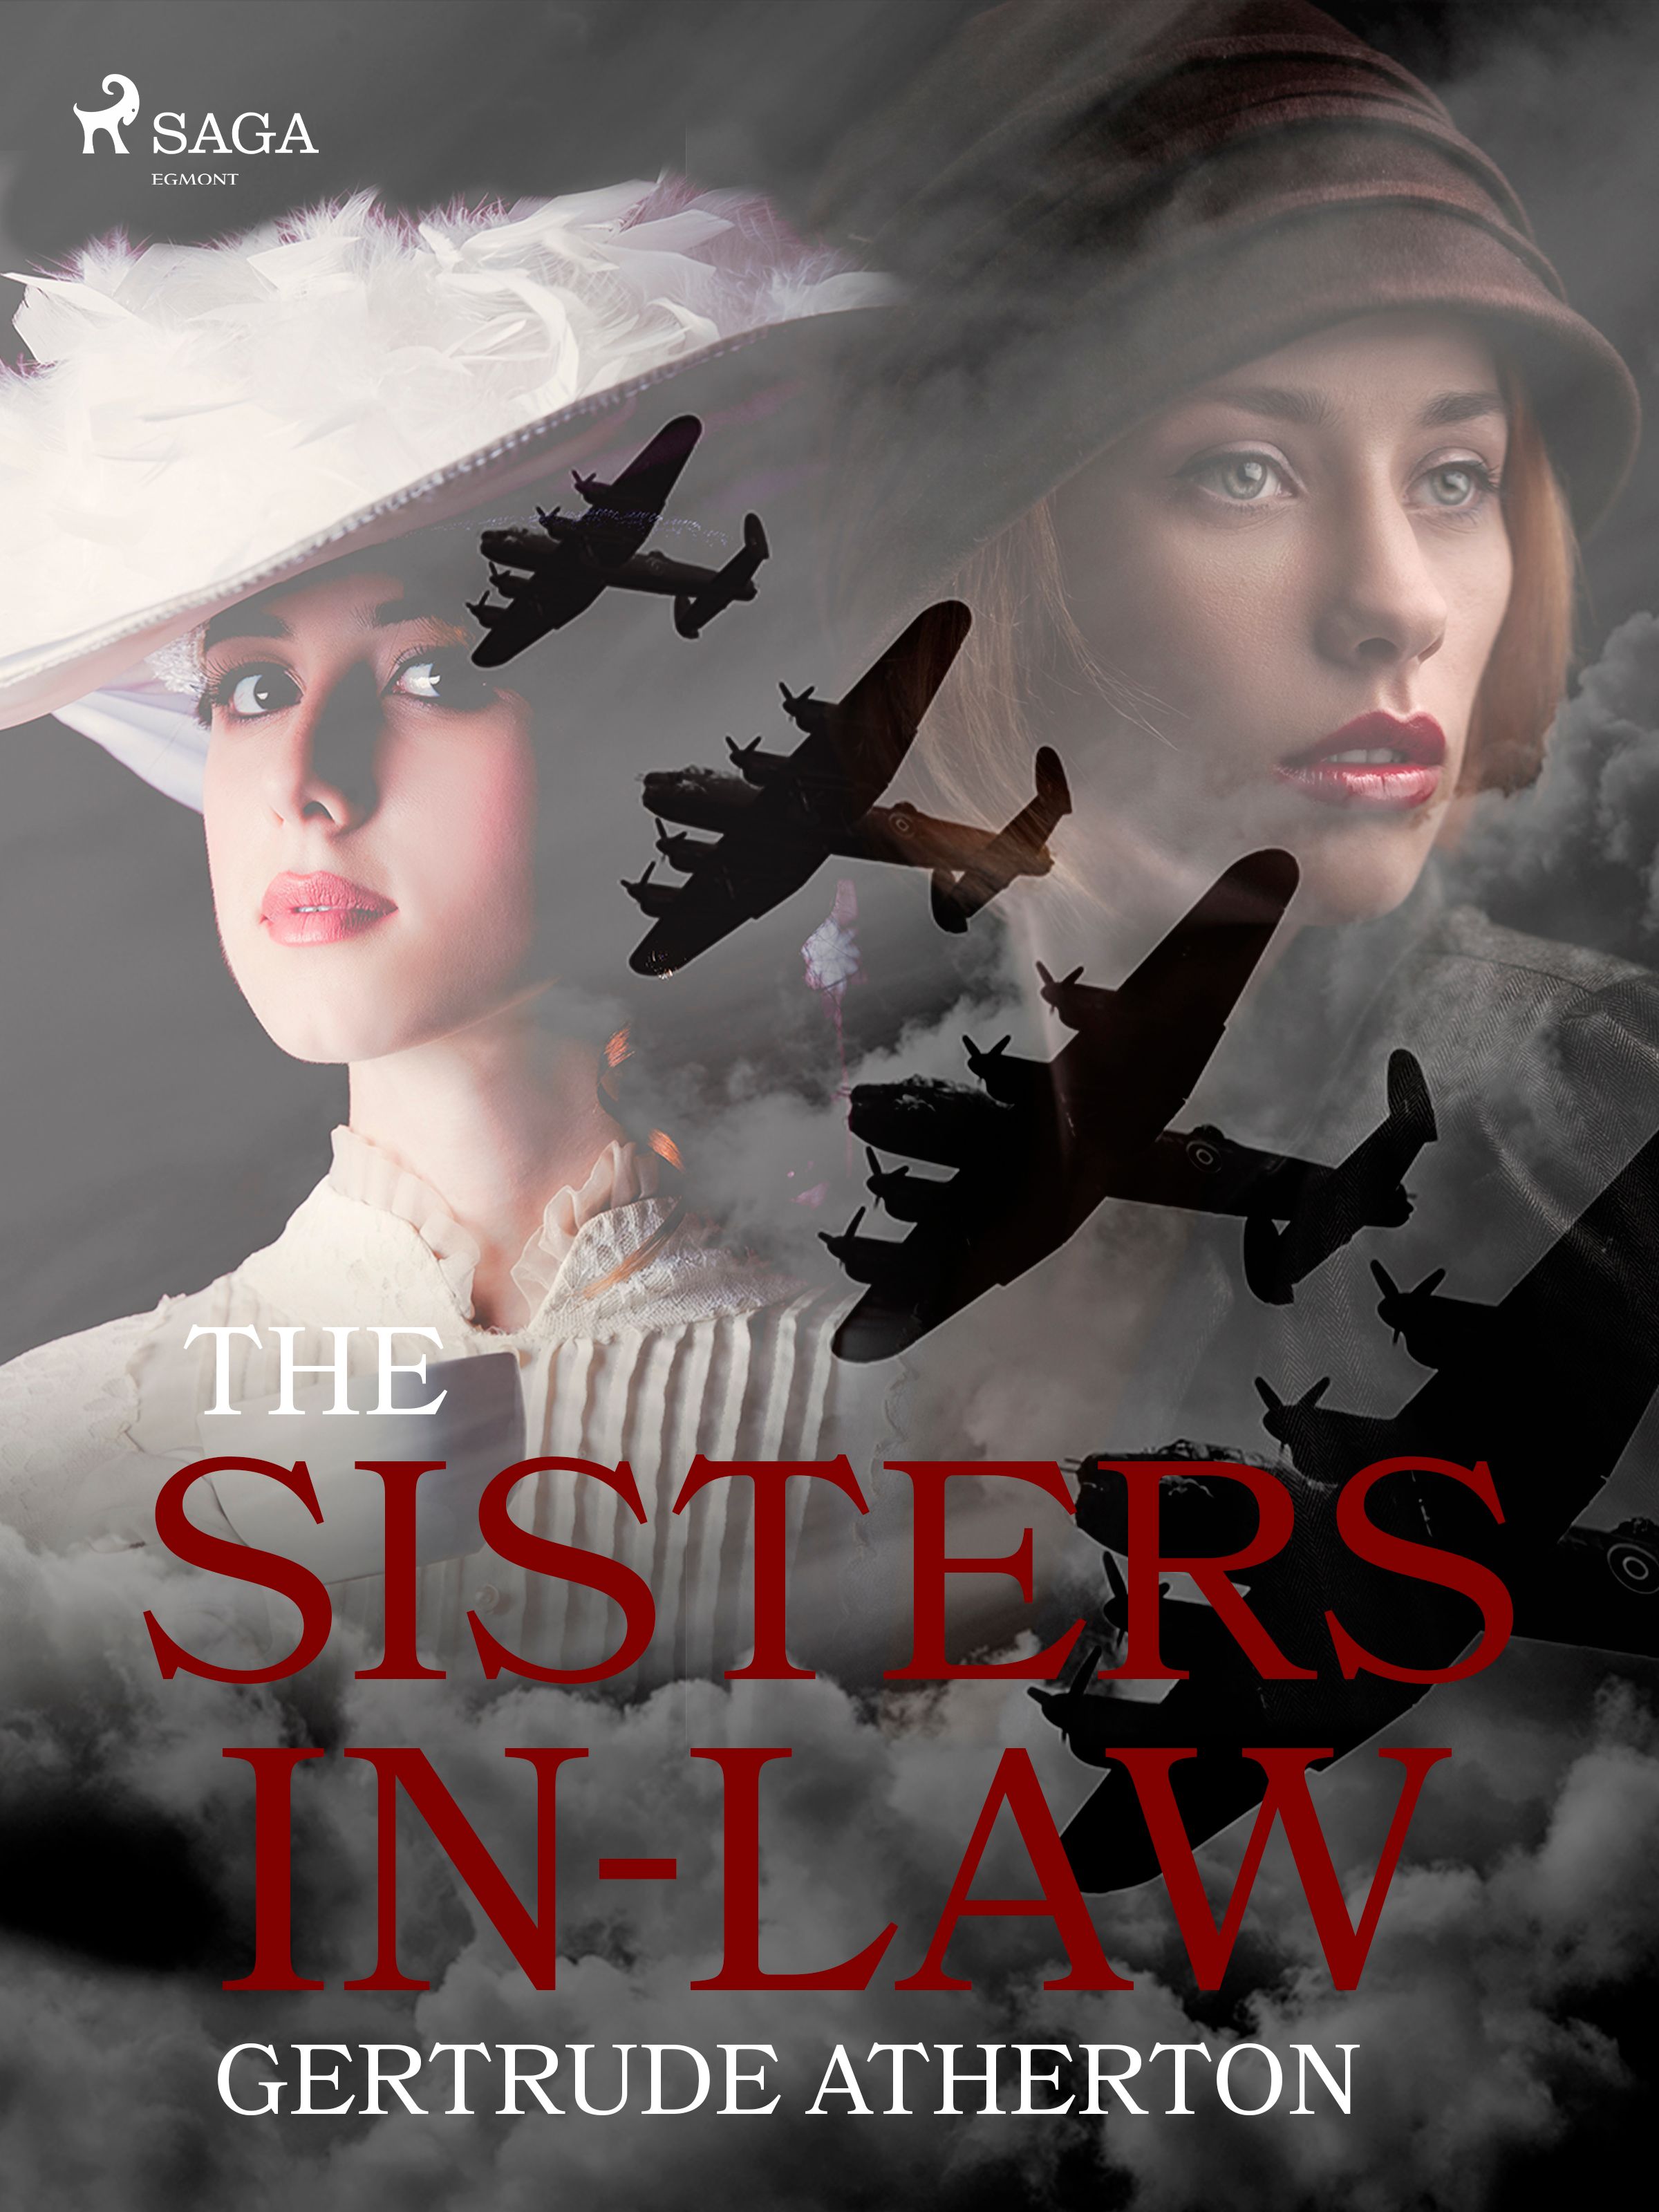 The Sisters-In-Law, eBook by Gertrude Atherton